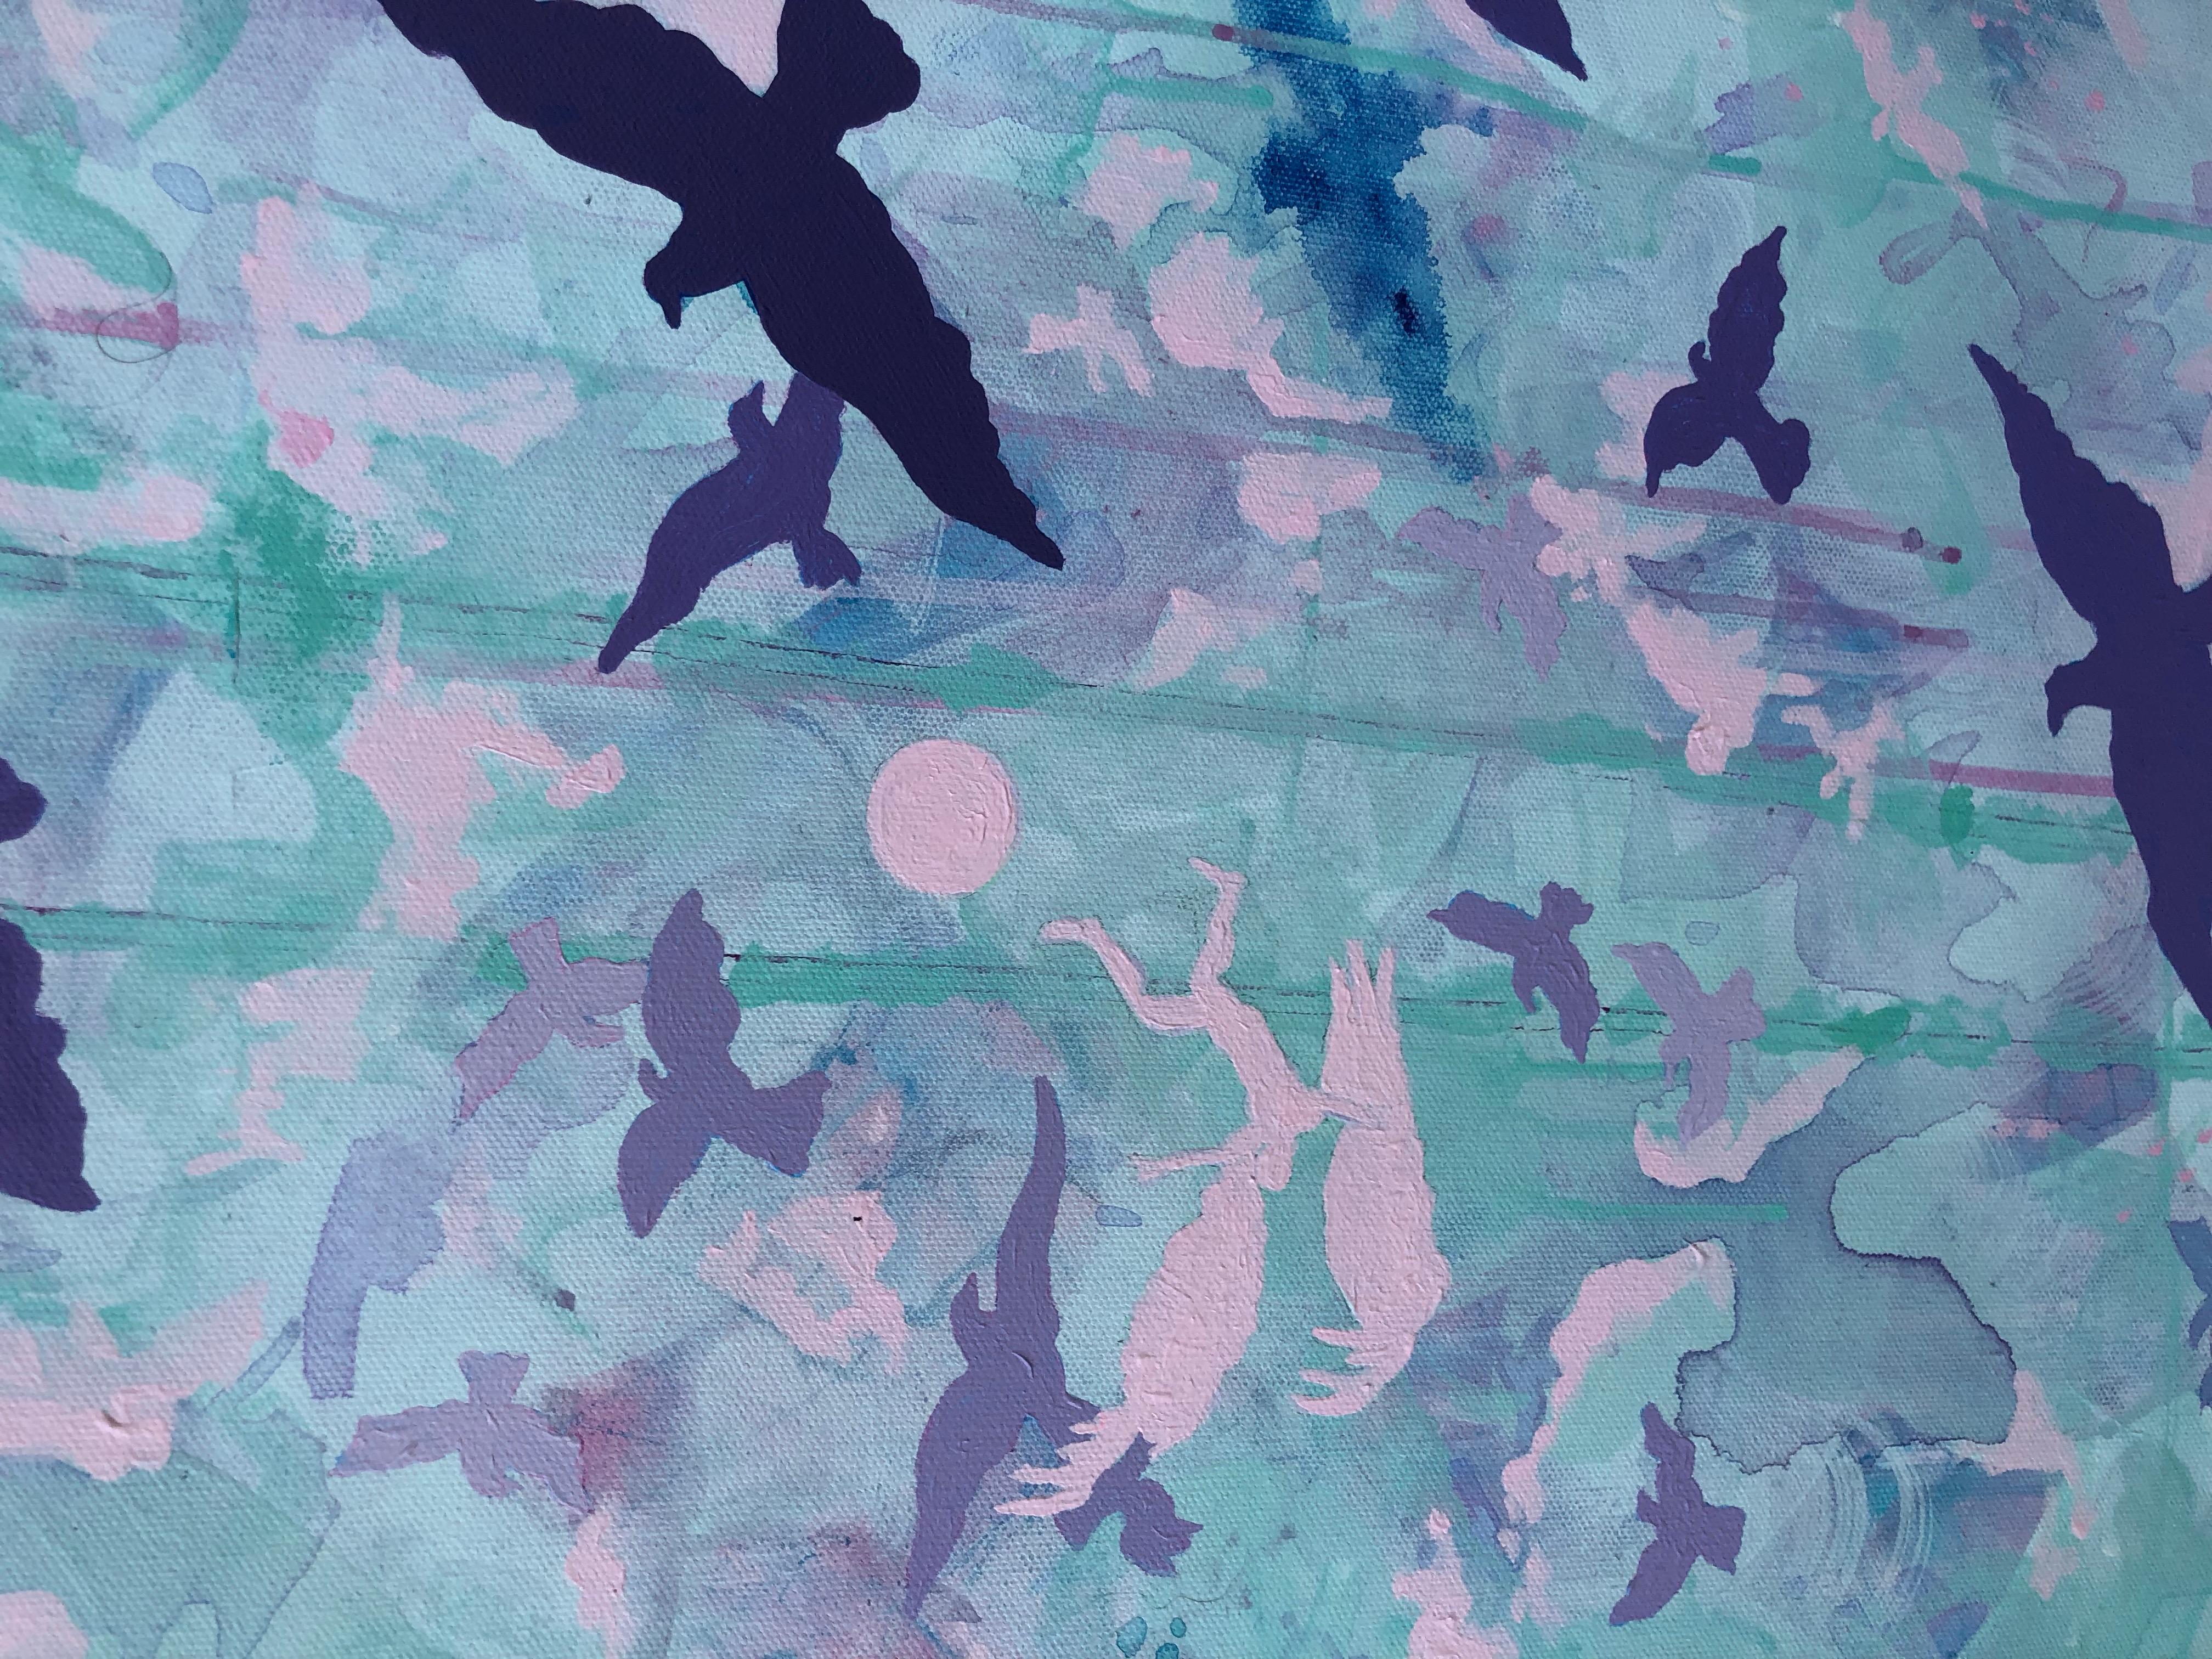 In Search of Icarus: mythology painting w/ pink, violet  birds & blue sky - Painting by Joseph McAleer